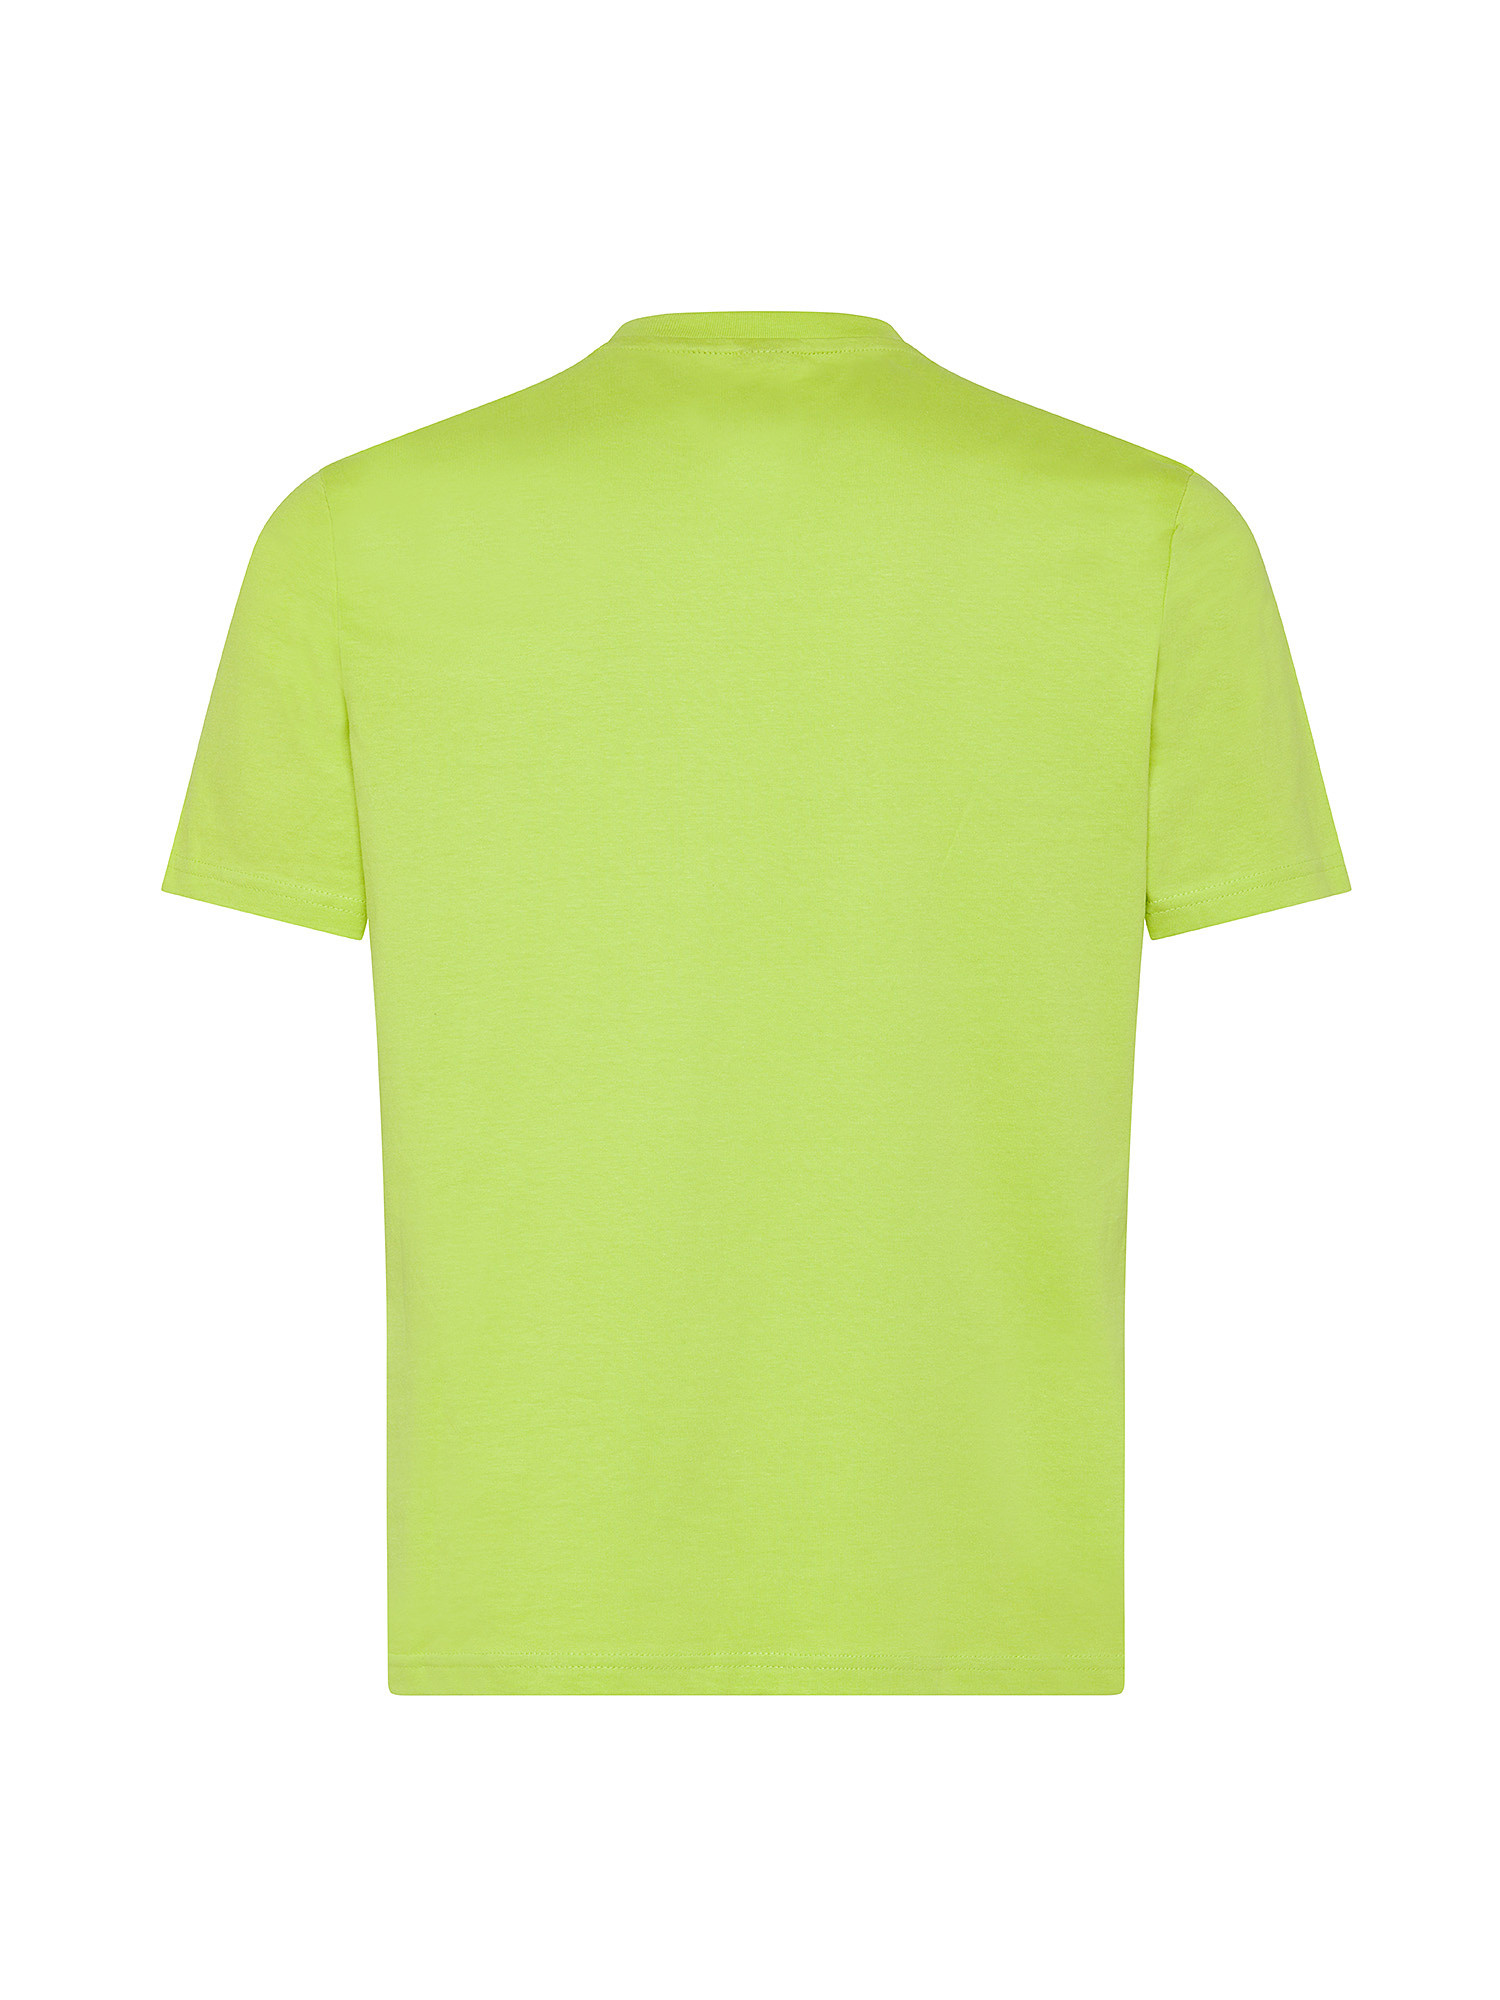 North sails - Organic cotton jersey T-shirt with printed maxi logo, Light Green, large image number 1